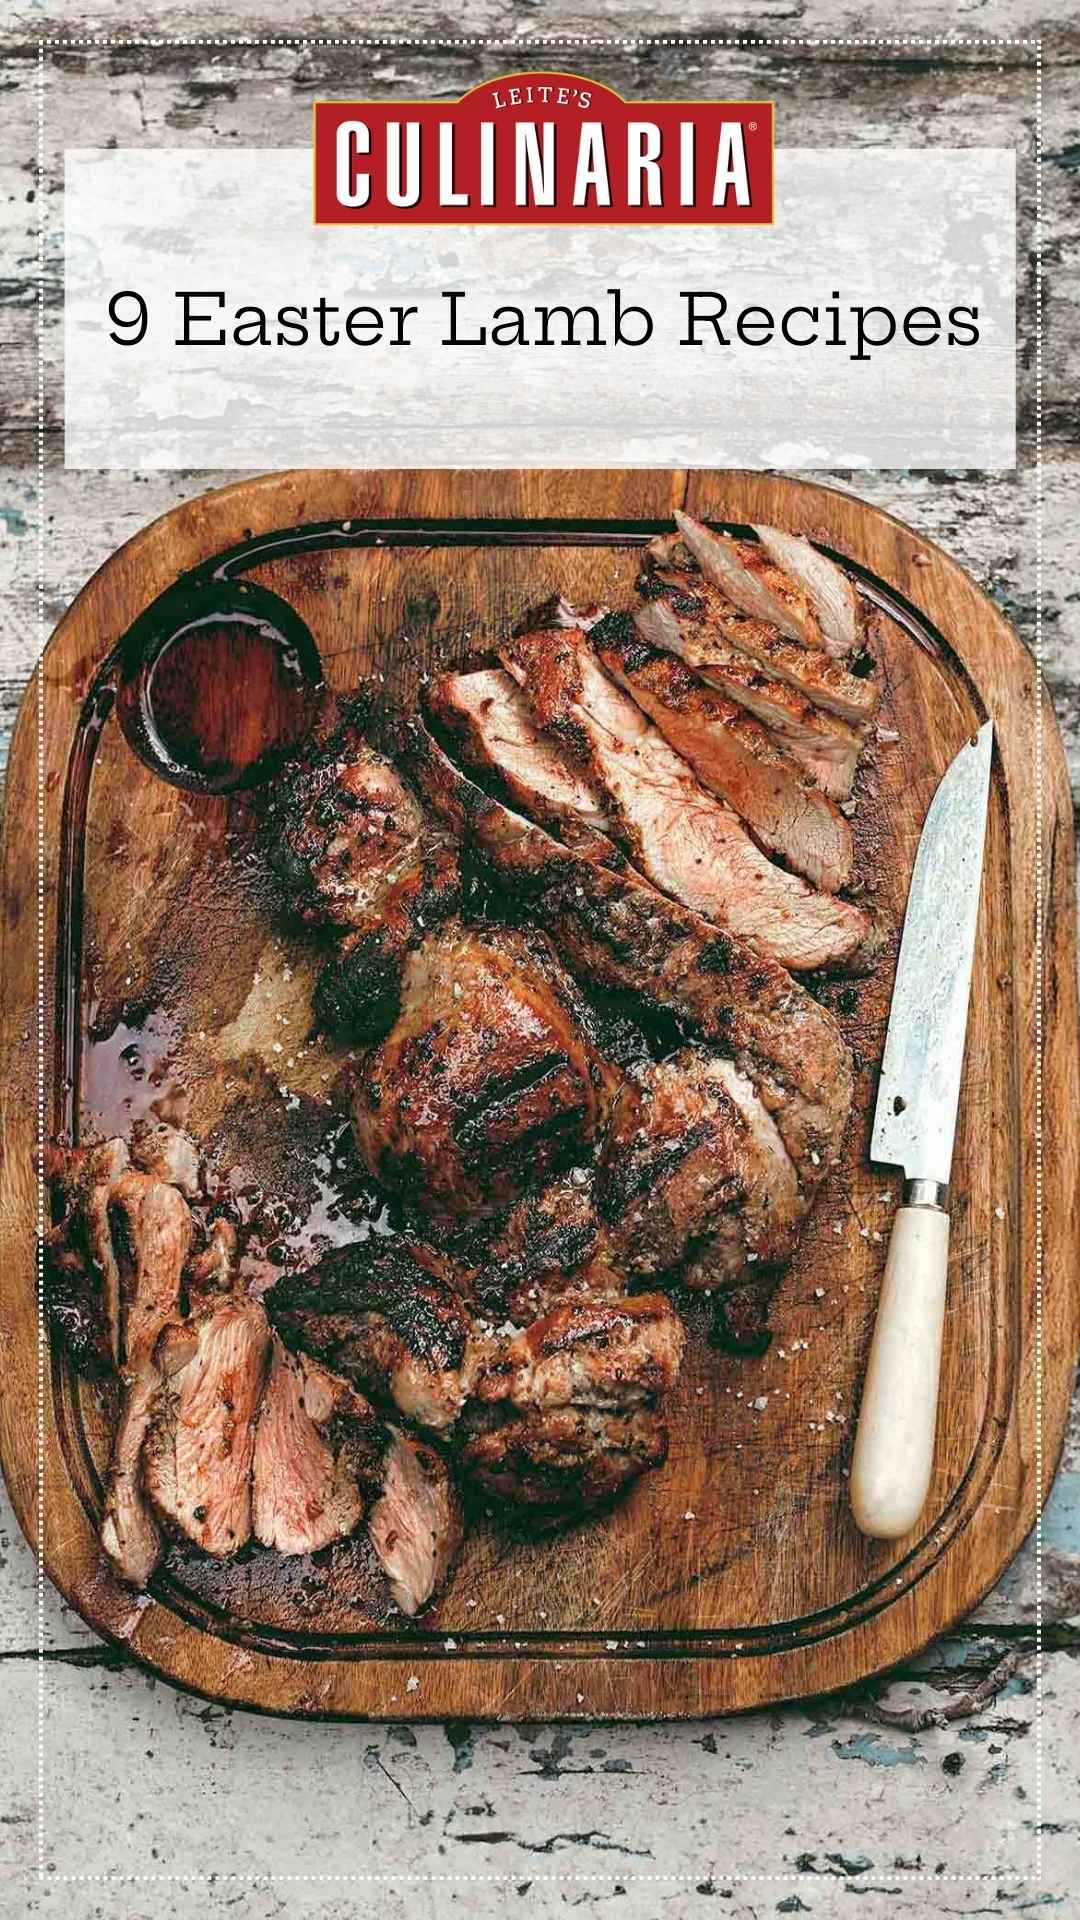 A carved grilled leg of lamb on a wooden cutting board.